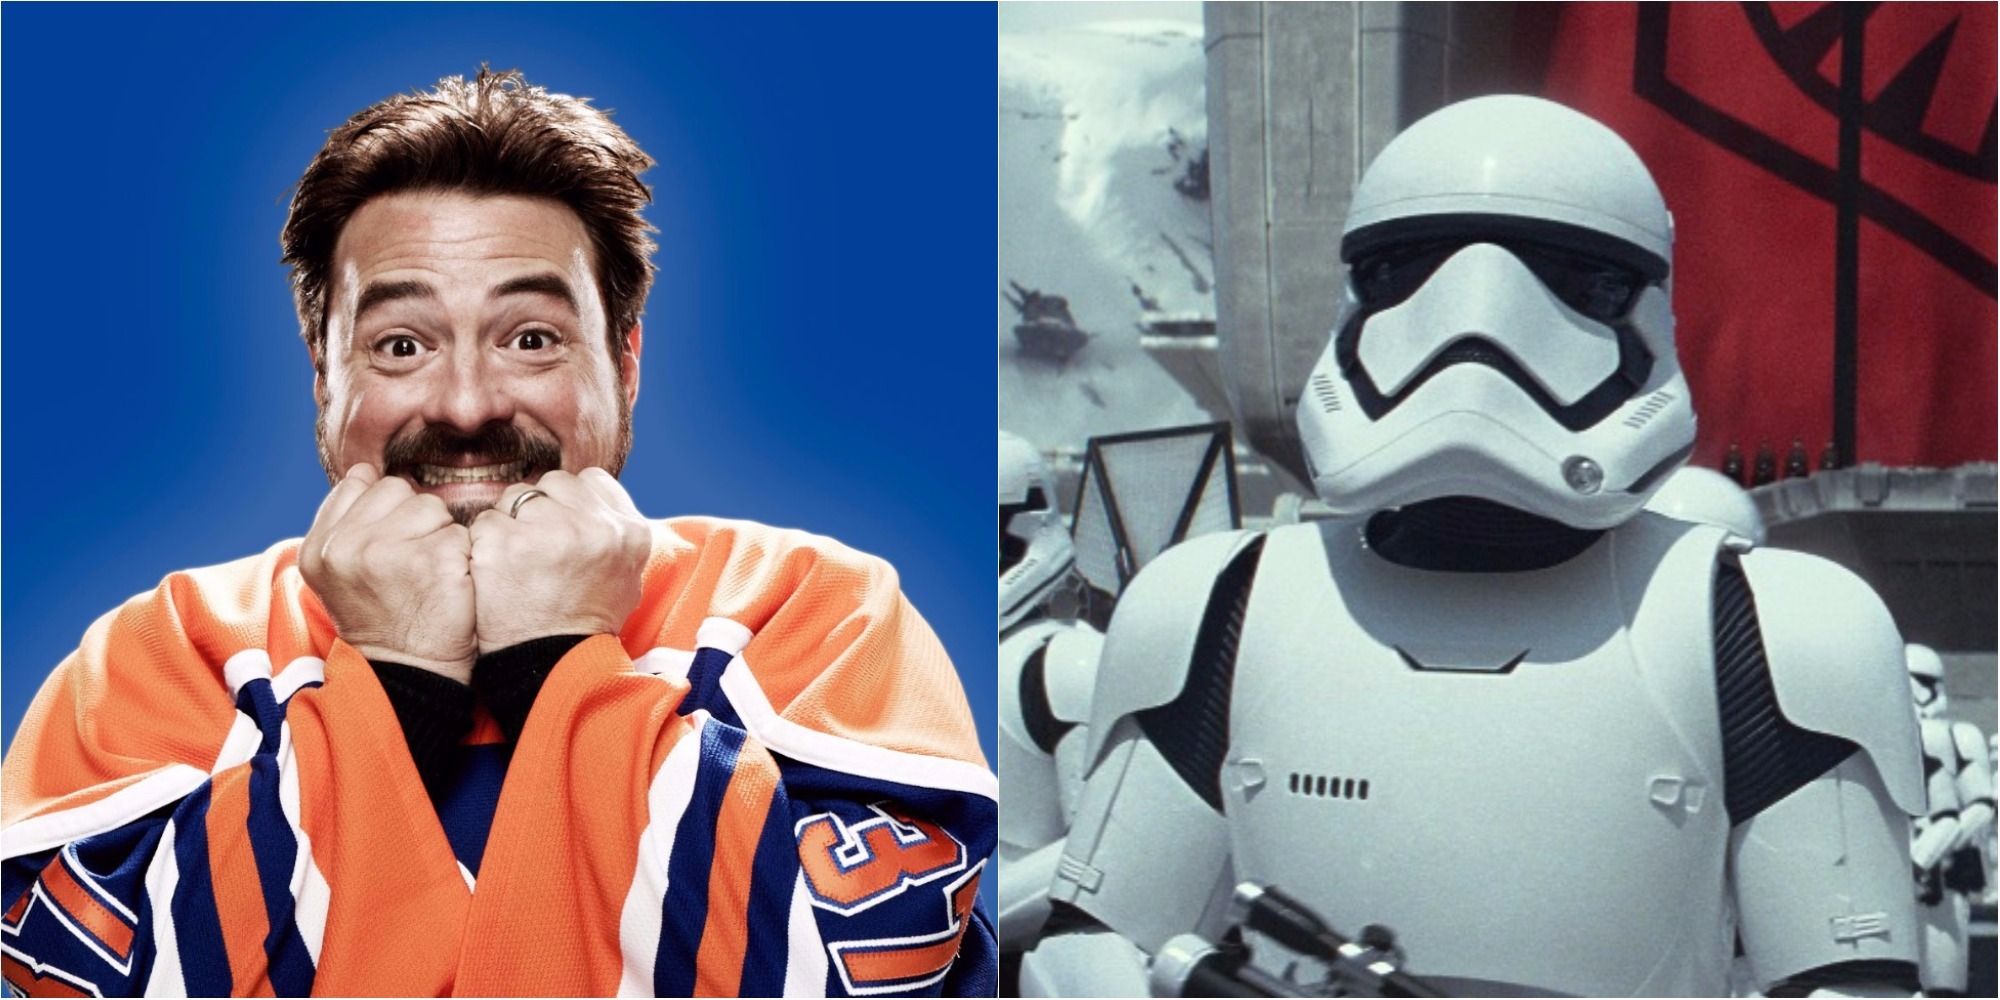 Kevin Smith and Star Wars First Order Stormtrooper